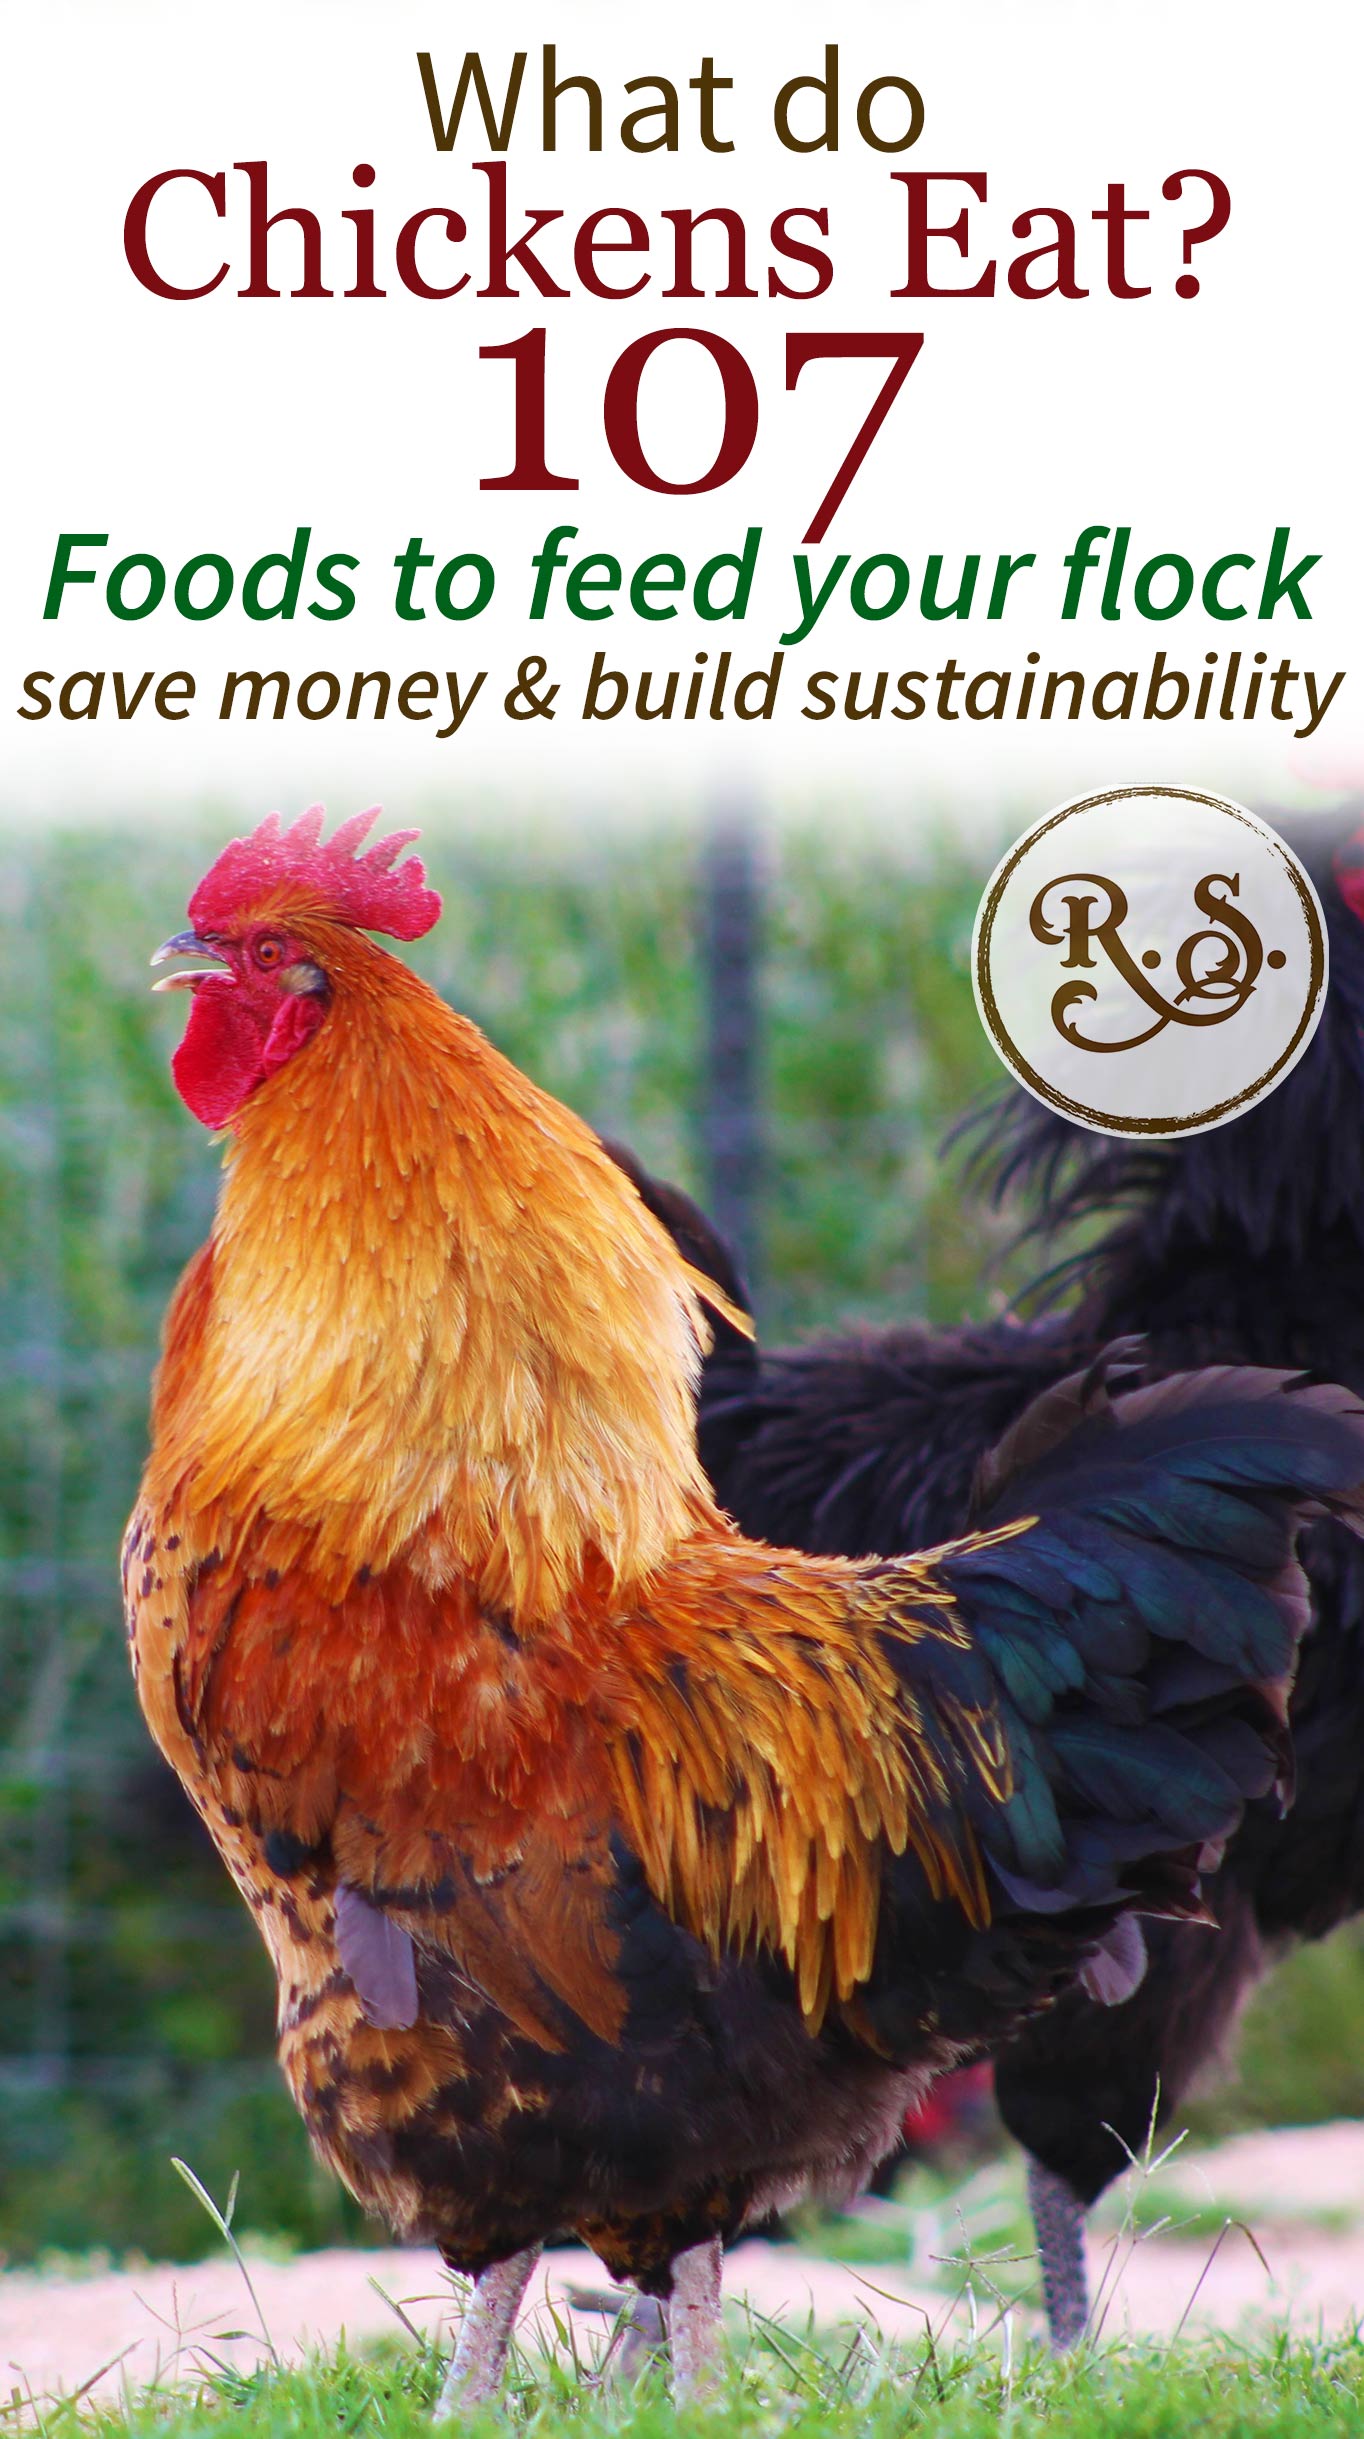 What do chickens eat? Here is your guide to feeding chickens. With 107 kinds of food to feed your backyard hens and roosters. Perfect DIY list of ideas to have for beginners.